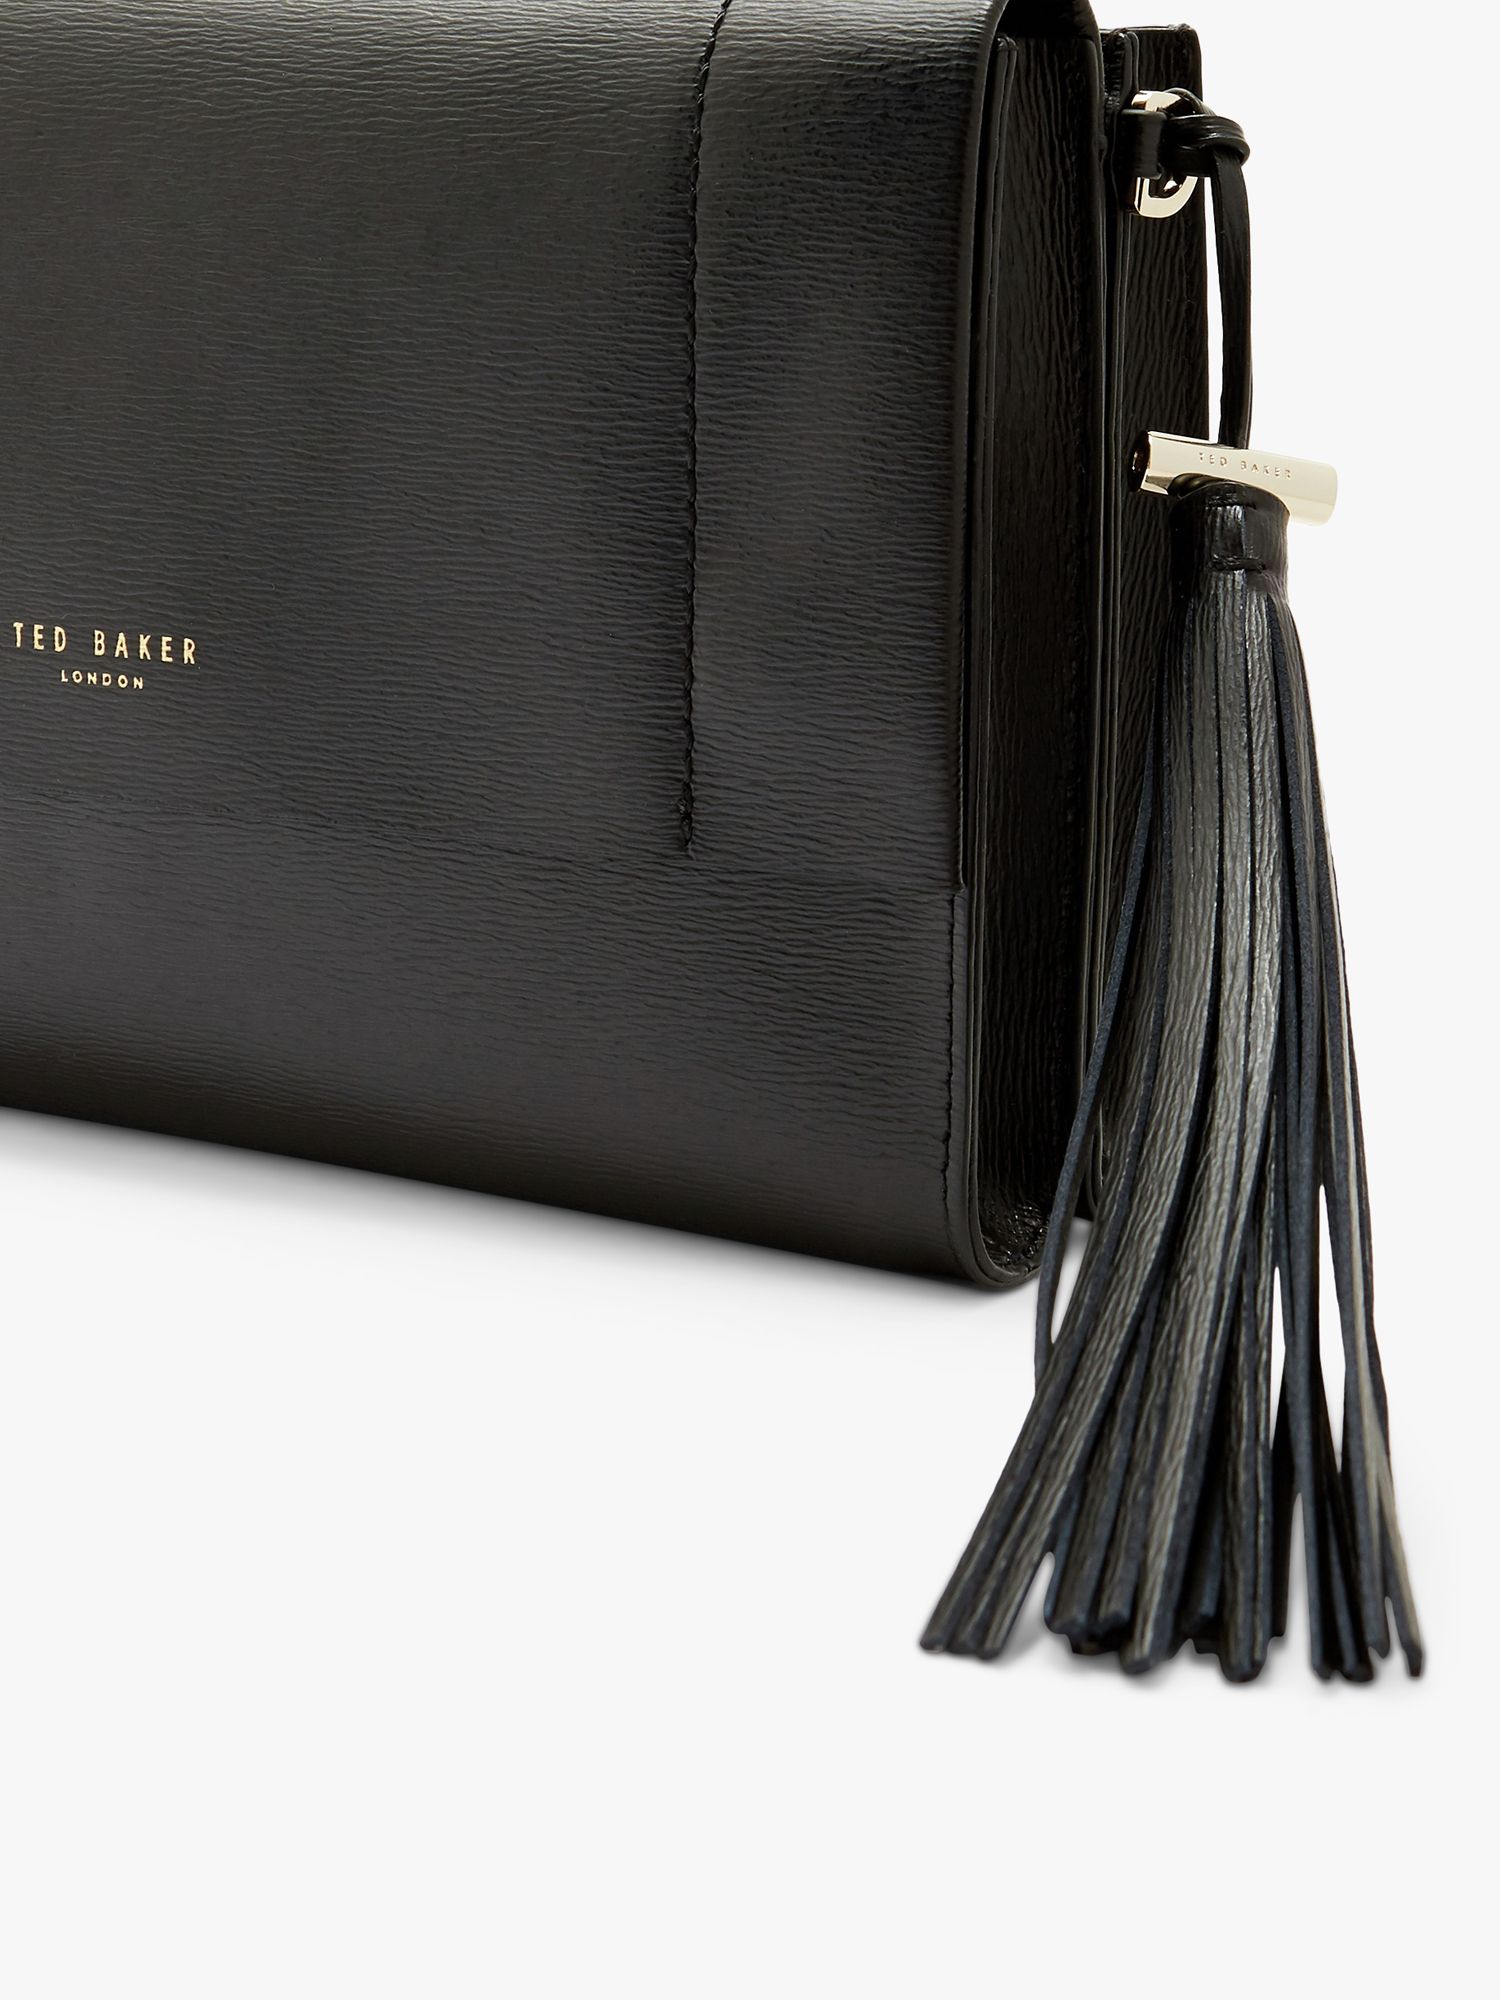 Ted Baker Natalei Leather Cross Body Bag at John Lewis & Partners